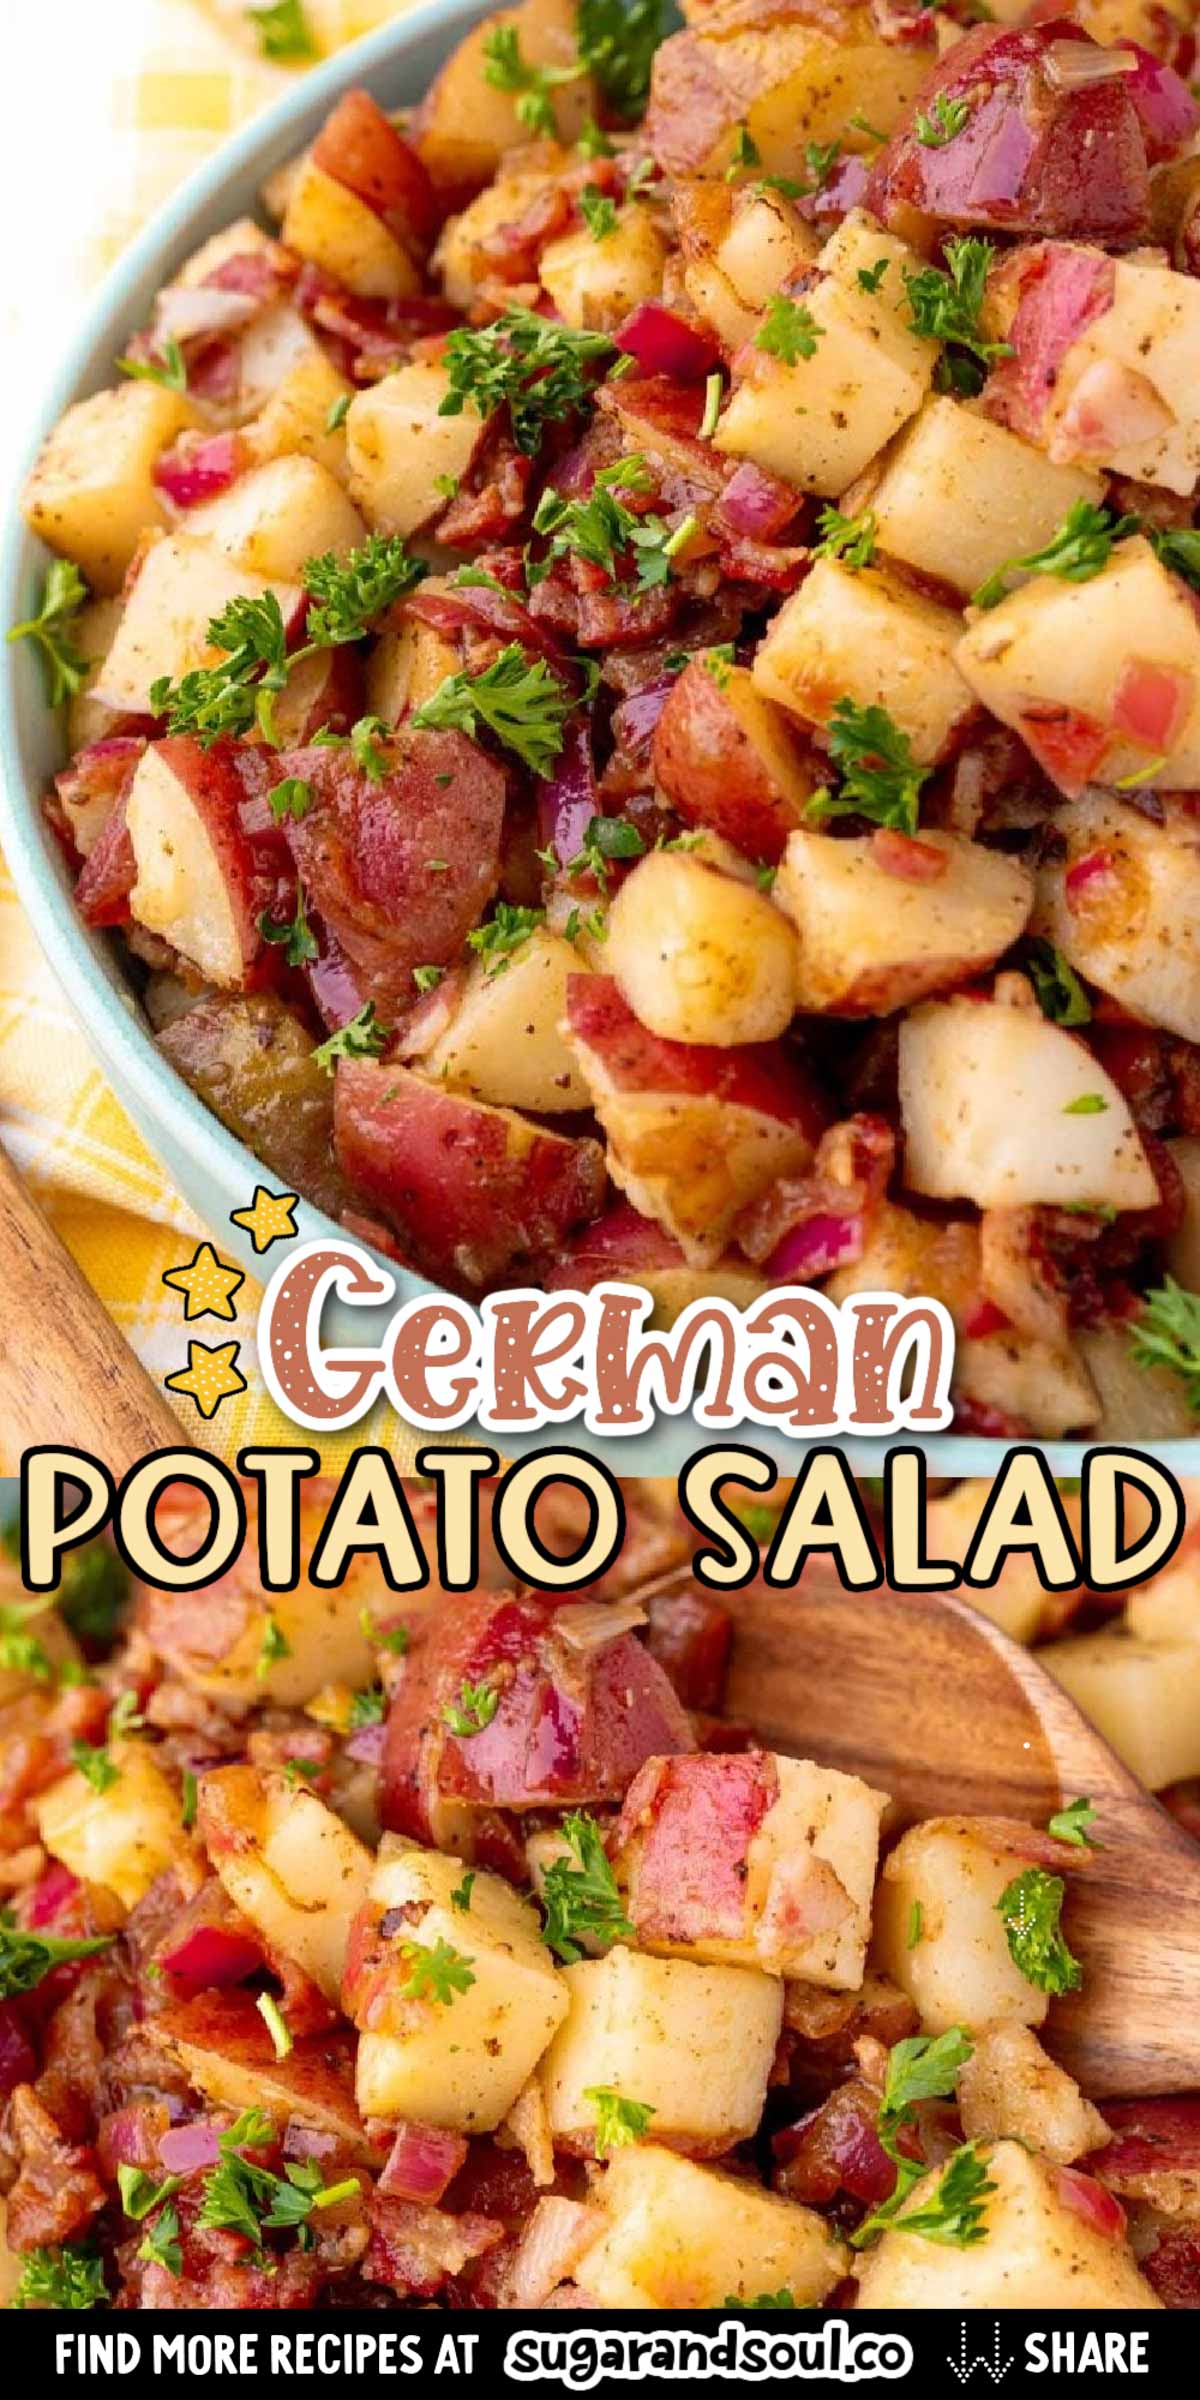 German Potato Salad is loaded with bacon, tender potatoes, red onion, dijon mustard, and more for a summer side dish that will disappear fast at any gathering! via @sugarandsoulco